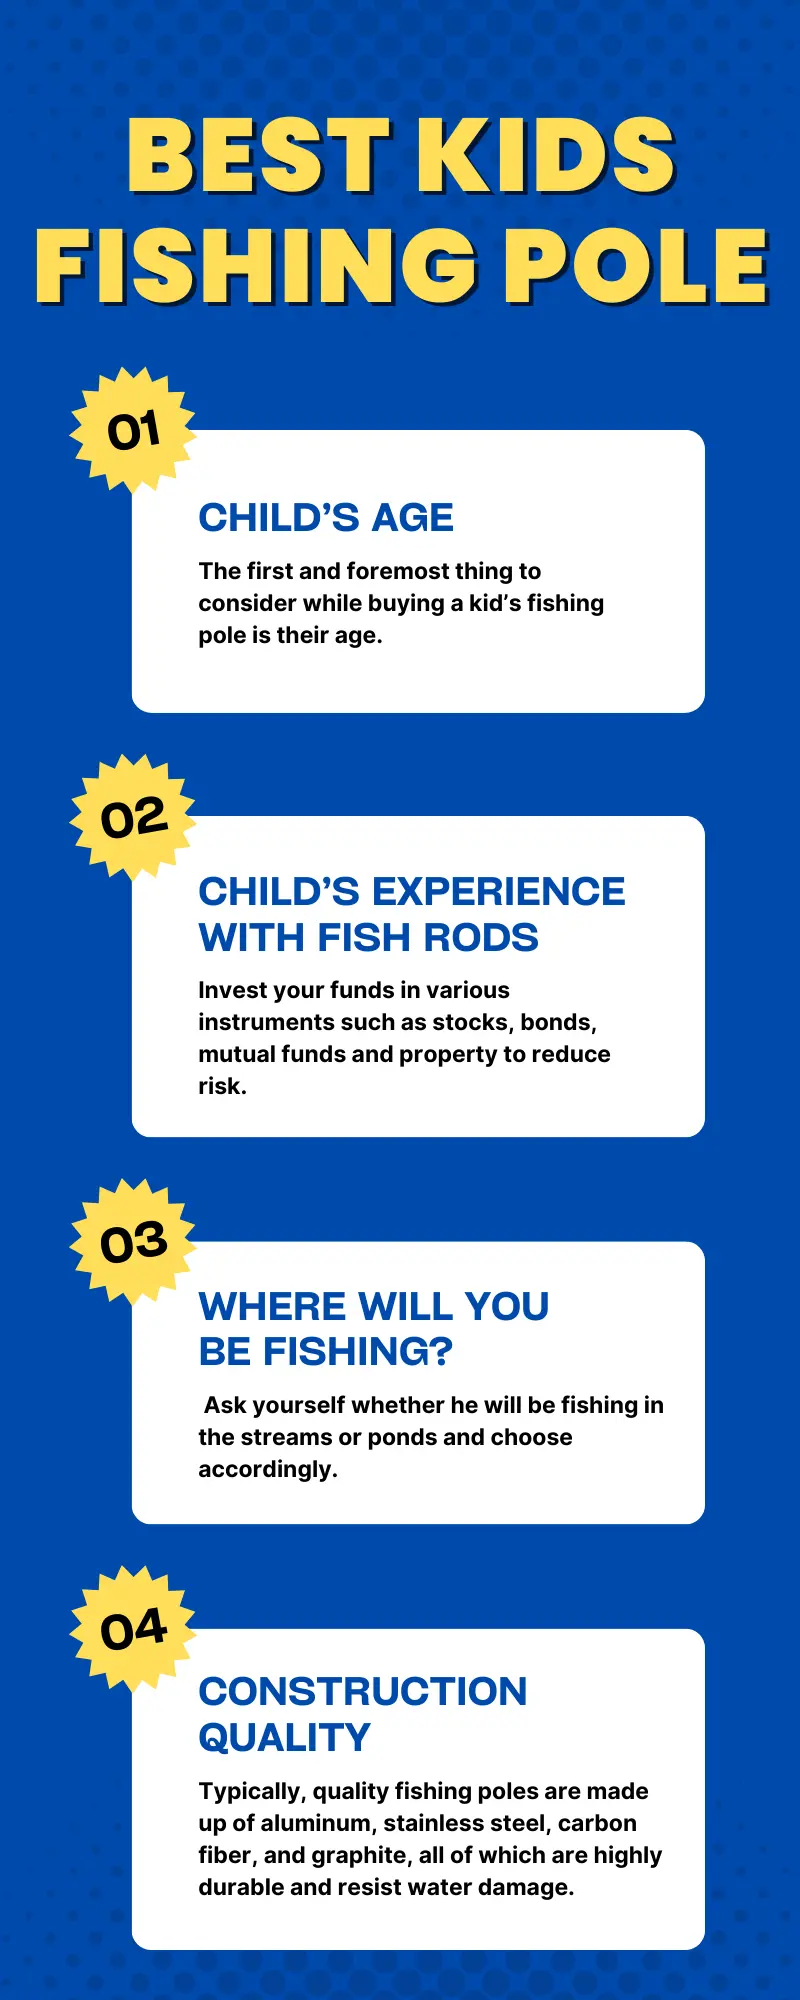 How to Find the Best Kids Fishing Pole